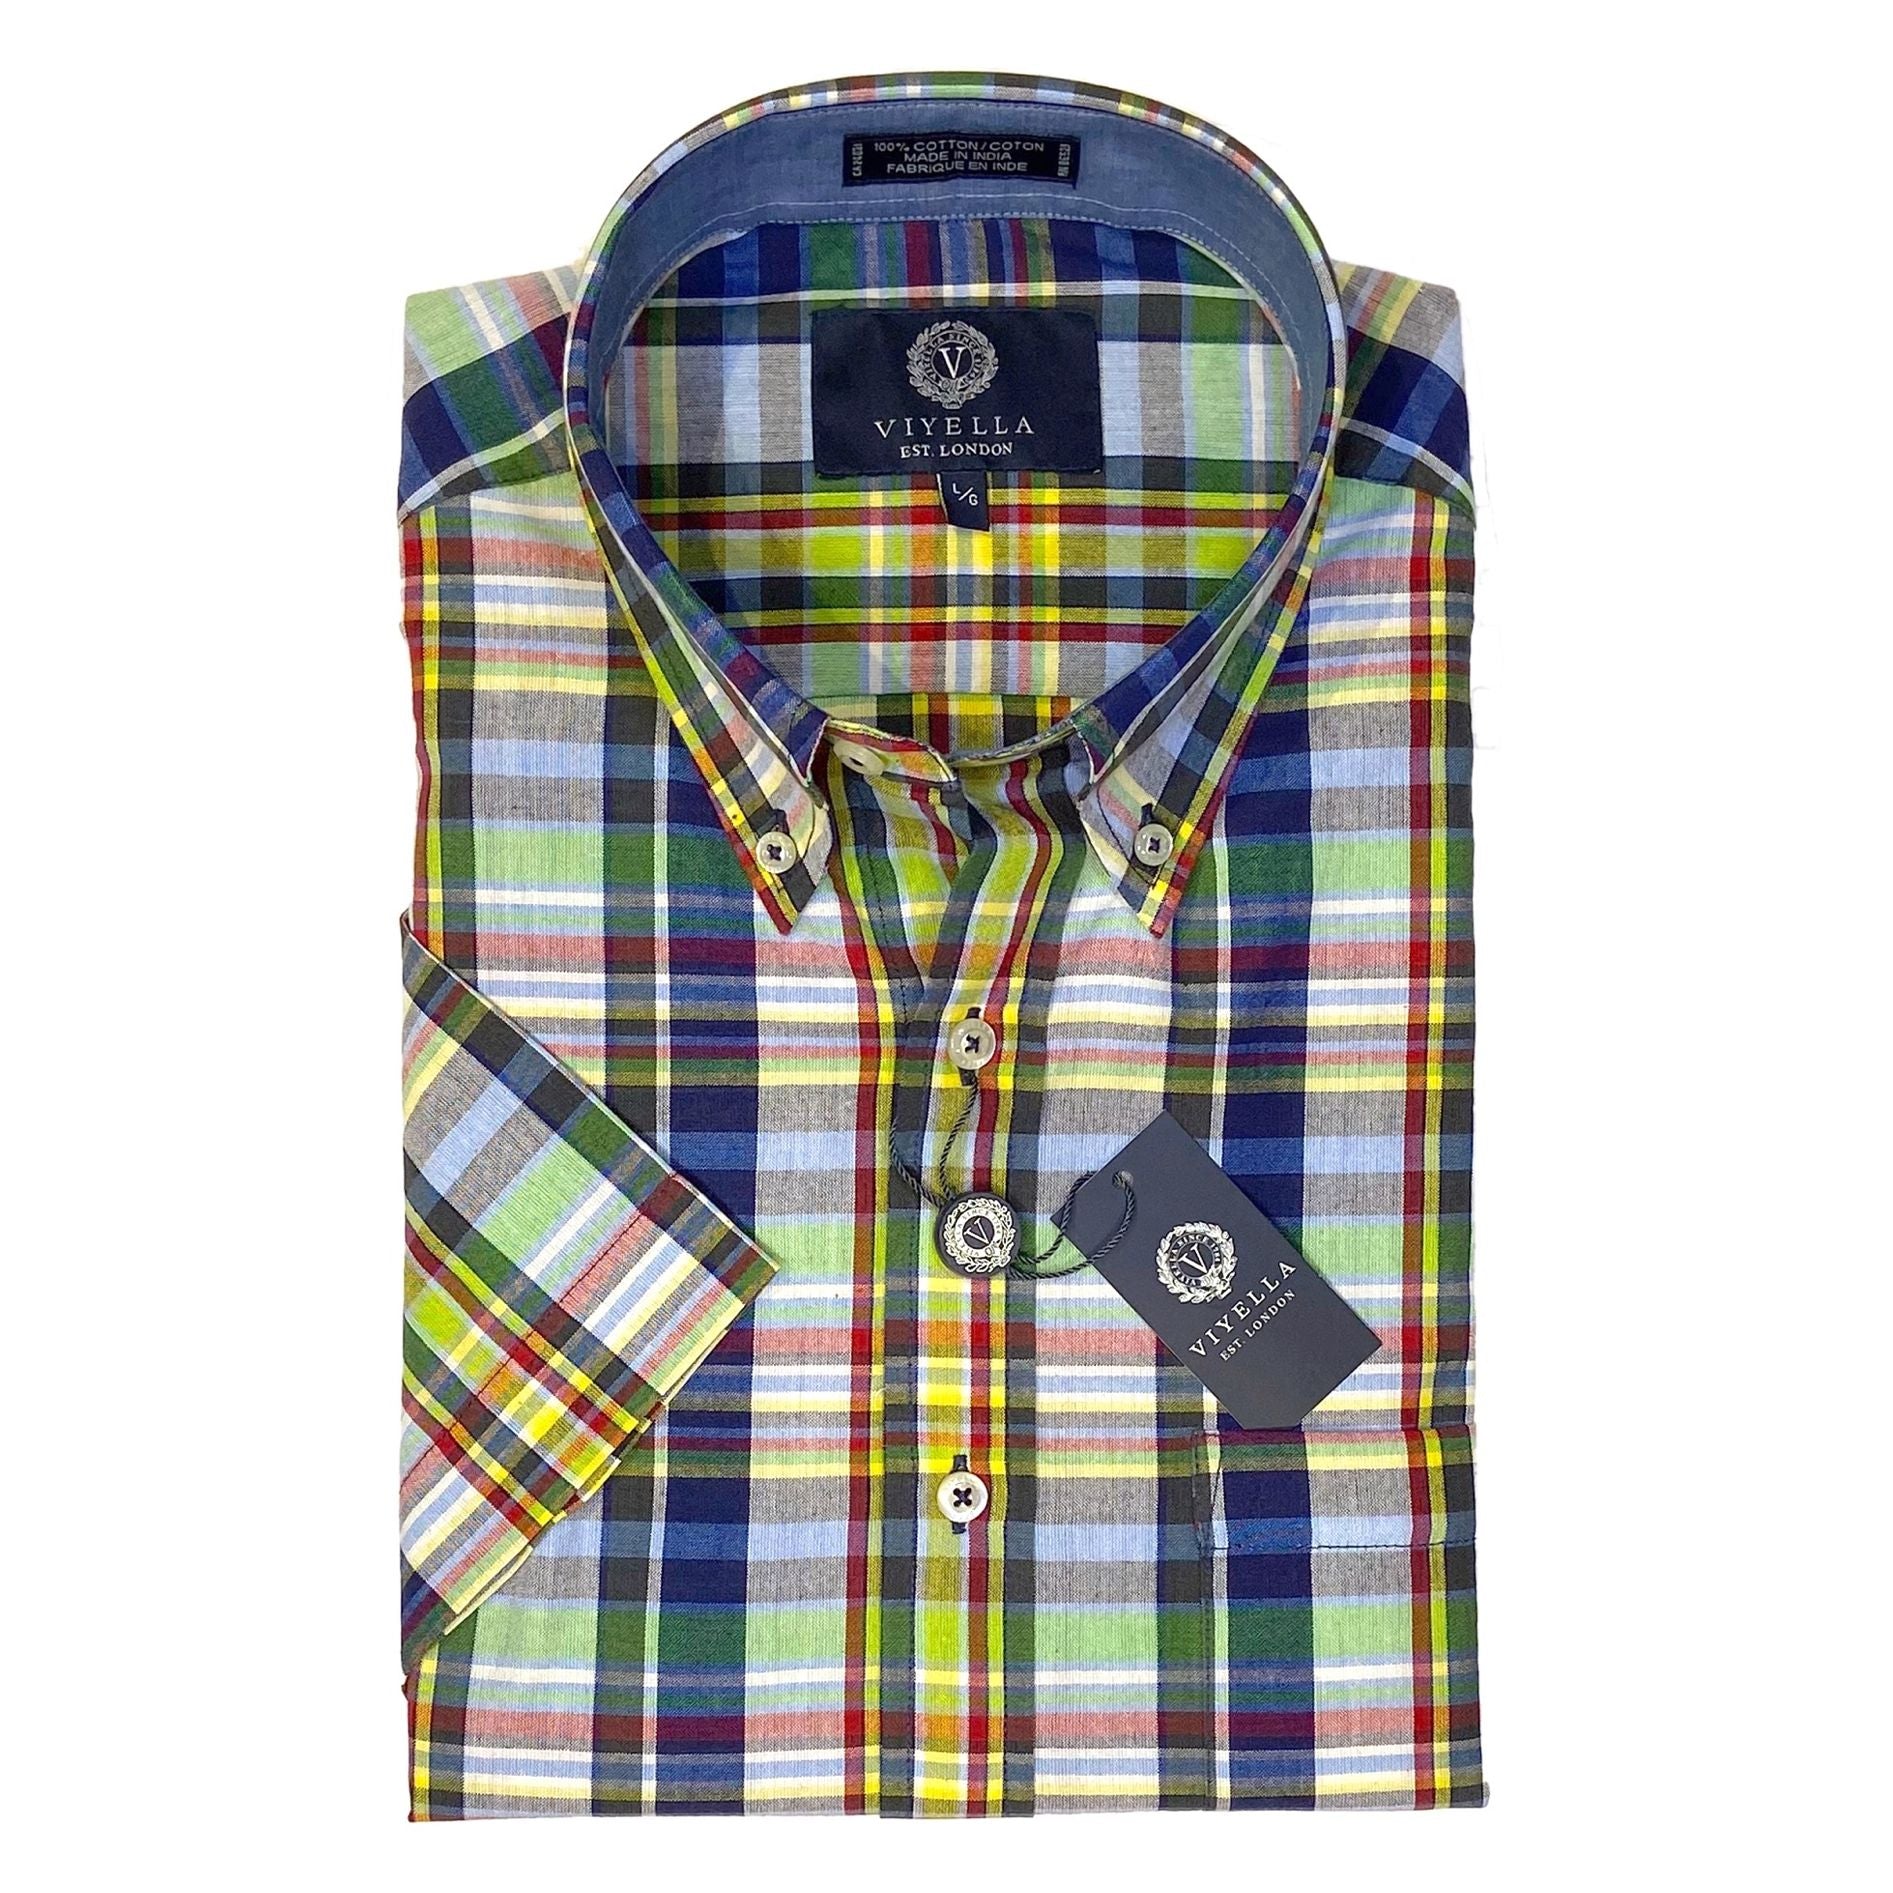 Cotton Madras Short Sleeve Cotton Sport Shirt in Yellow, Navy, and Green Multi Plaid by Viyella